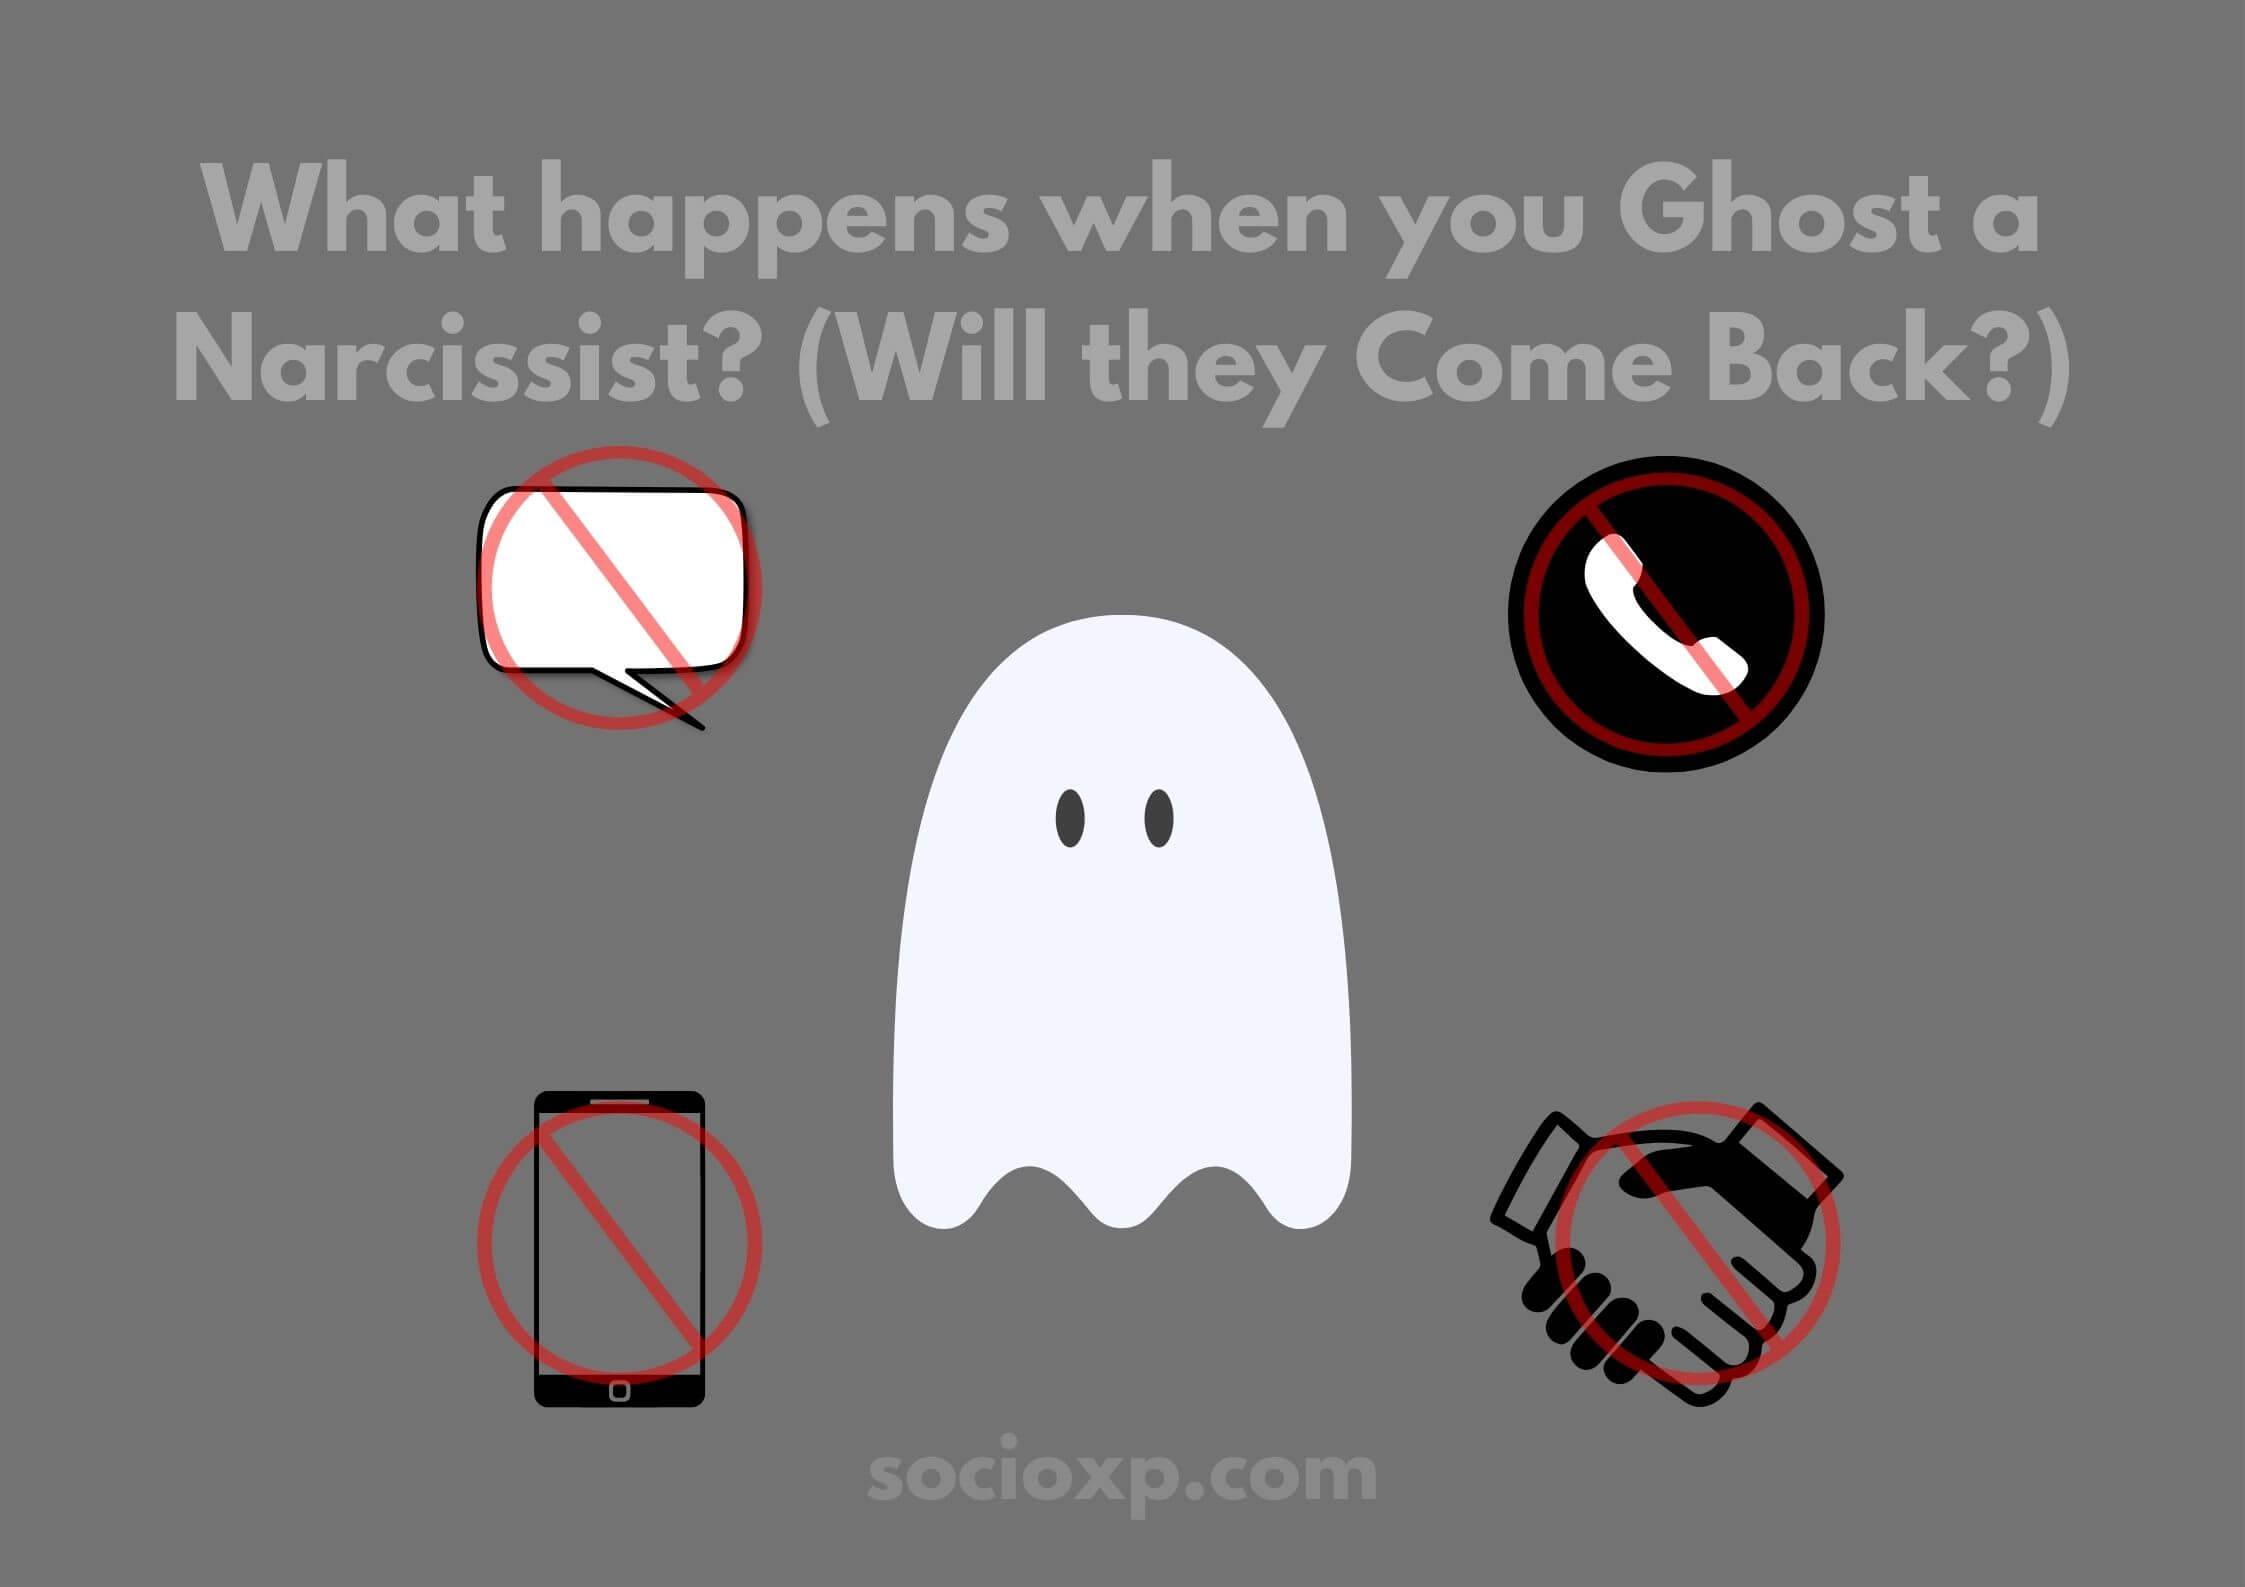 What happens when you Ghost a Narcissist? (Will they Come Back?)